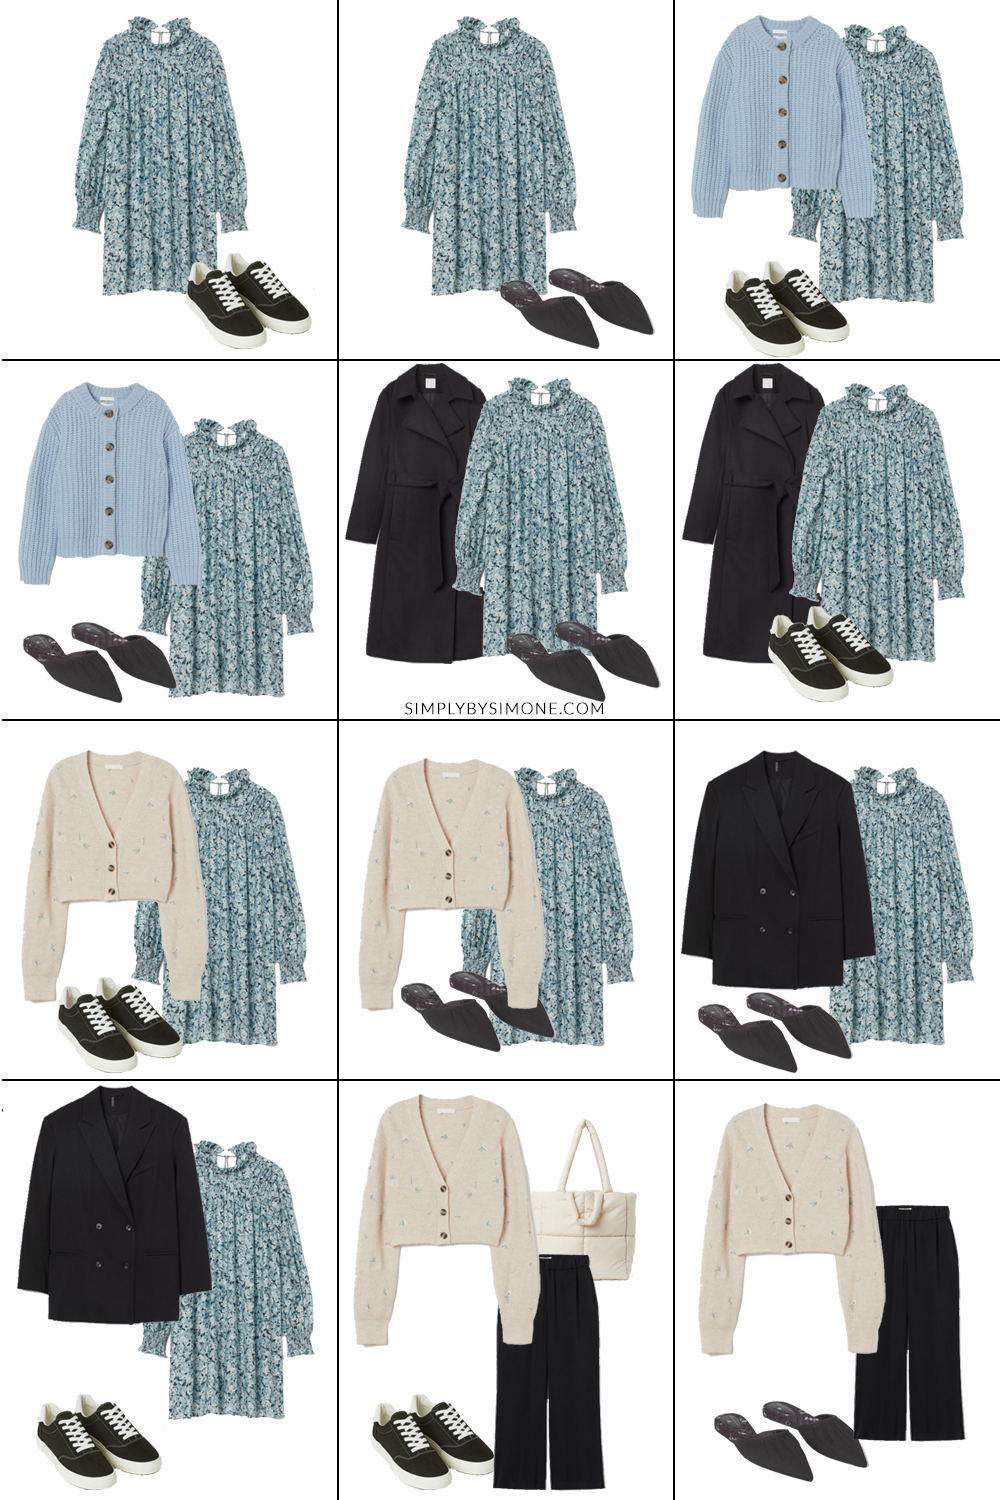 Best H&M Clothes For Women, 2021 Guide